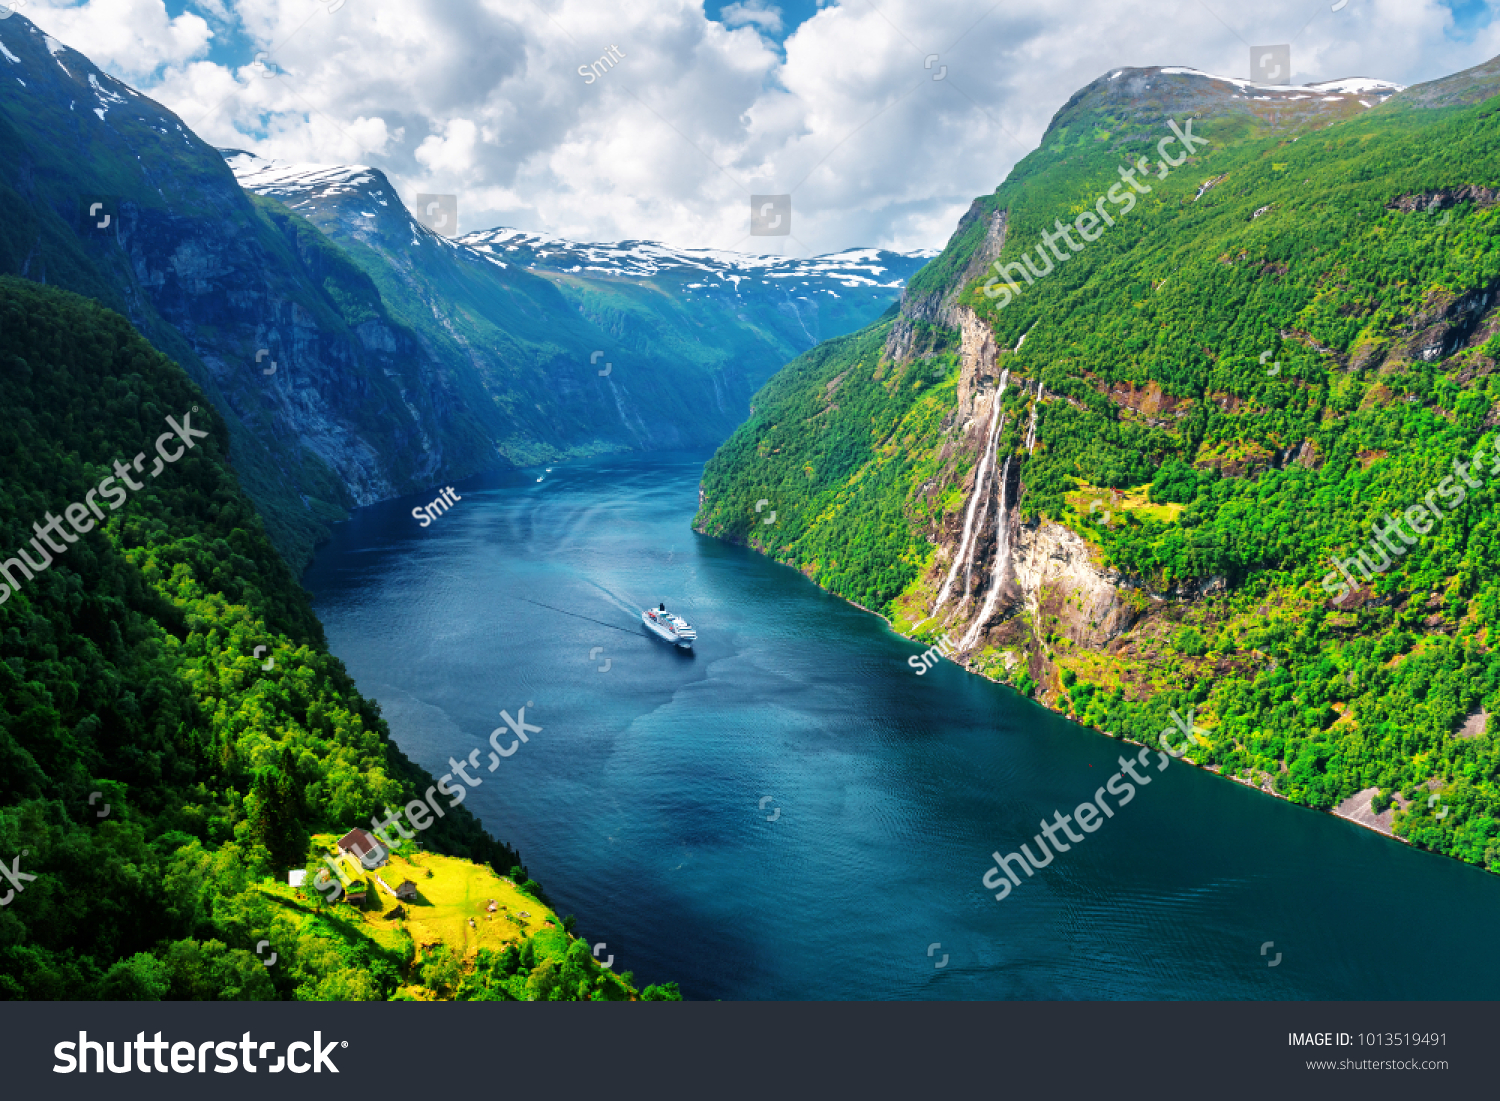 Breathtaking view of Sunnylvsfjorden fjord and famous Seven Sisters waterfalls, near Geiranger village in western Norway. #1013519491